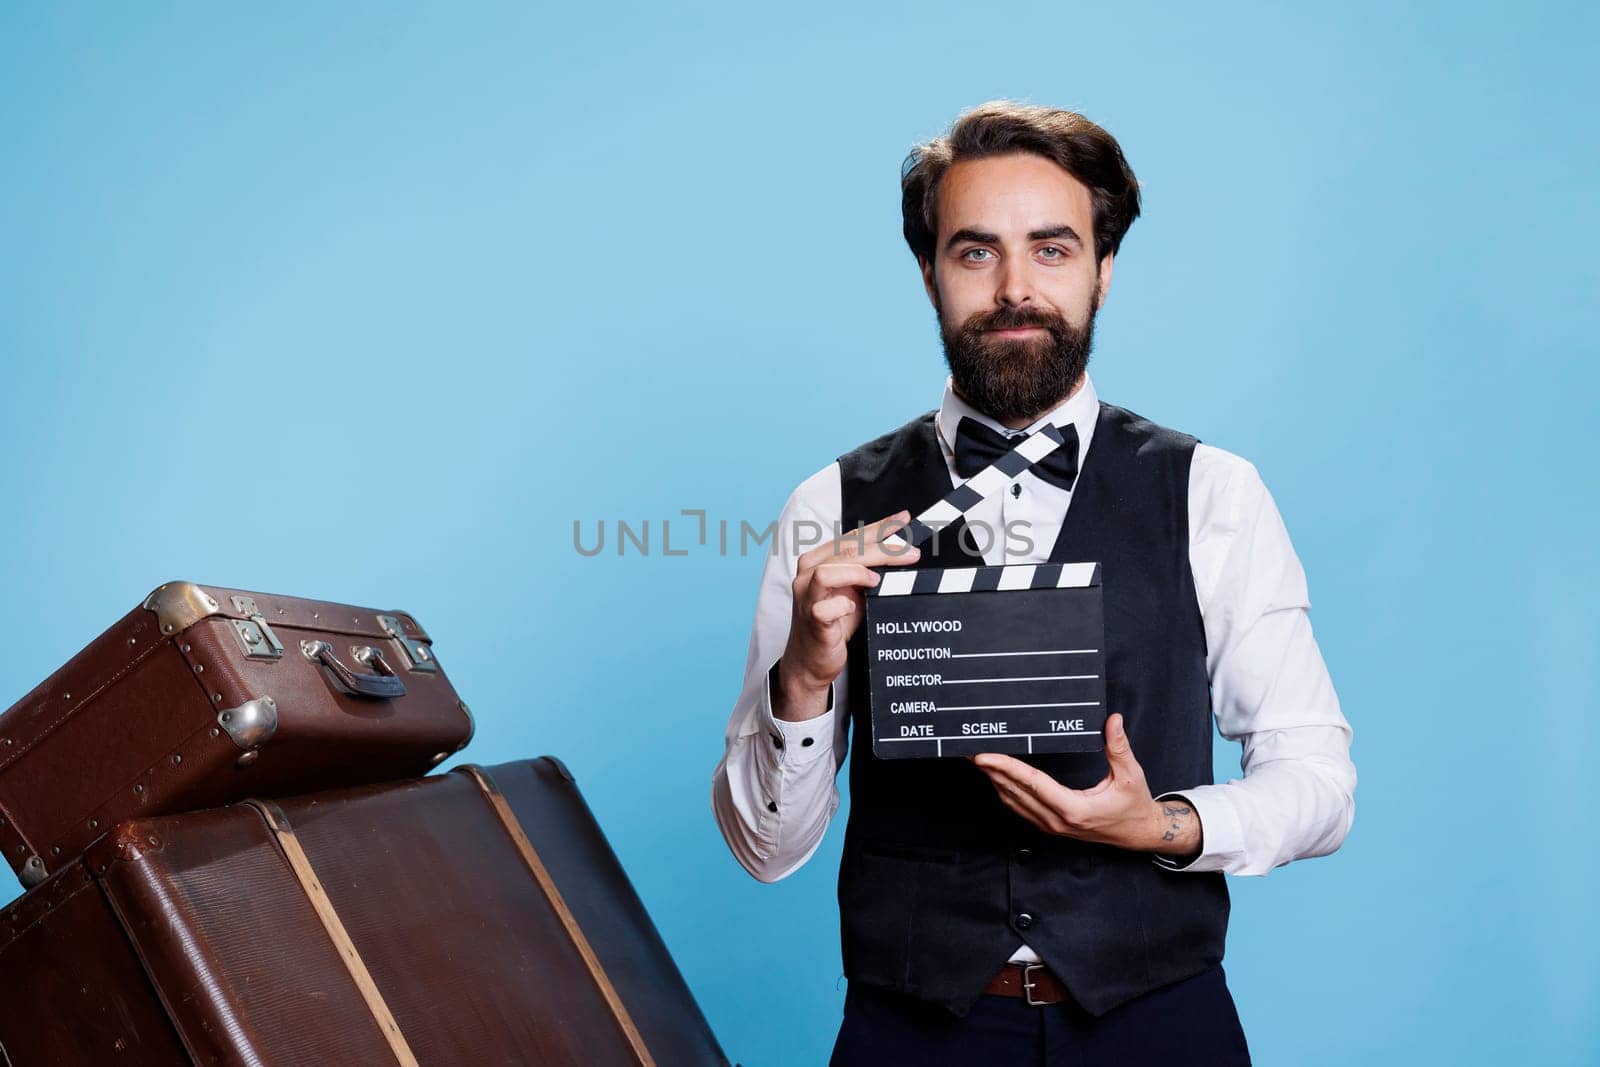 Doorkeeper clapping filmslate on camera, saying action to cut scene for fun against blue background. Classy hotel bellboy pretending to work in movie production using clapperboard.